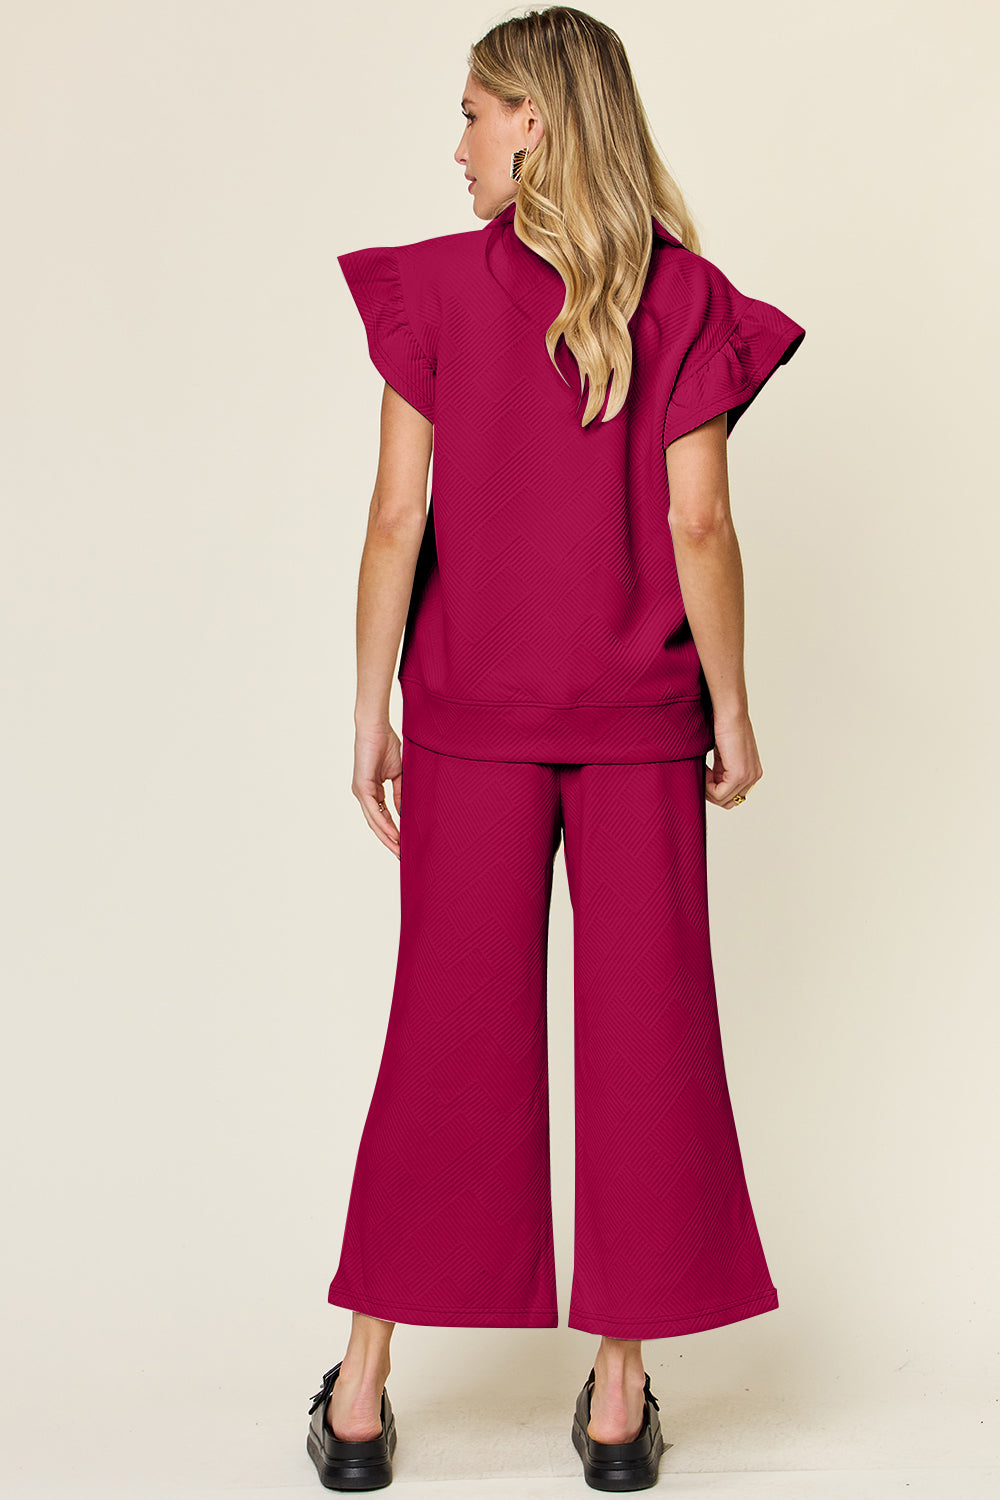 5 COLORS * Boujie Babe Textured Flounce Sleeve Top and Wide Leg Pants